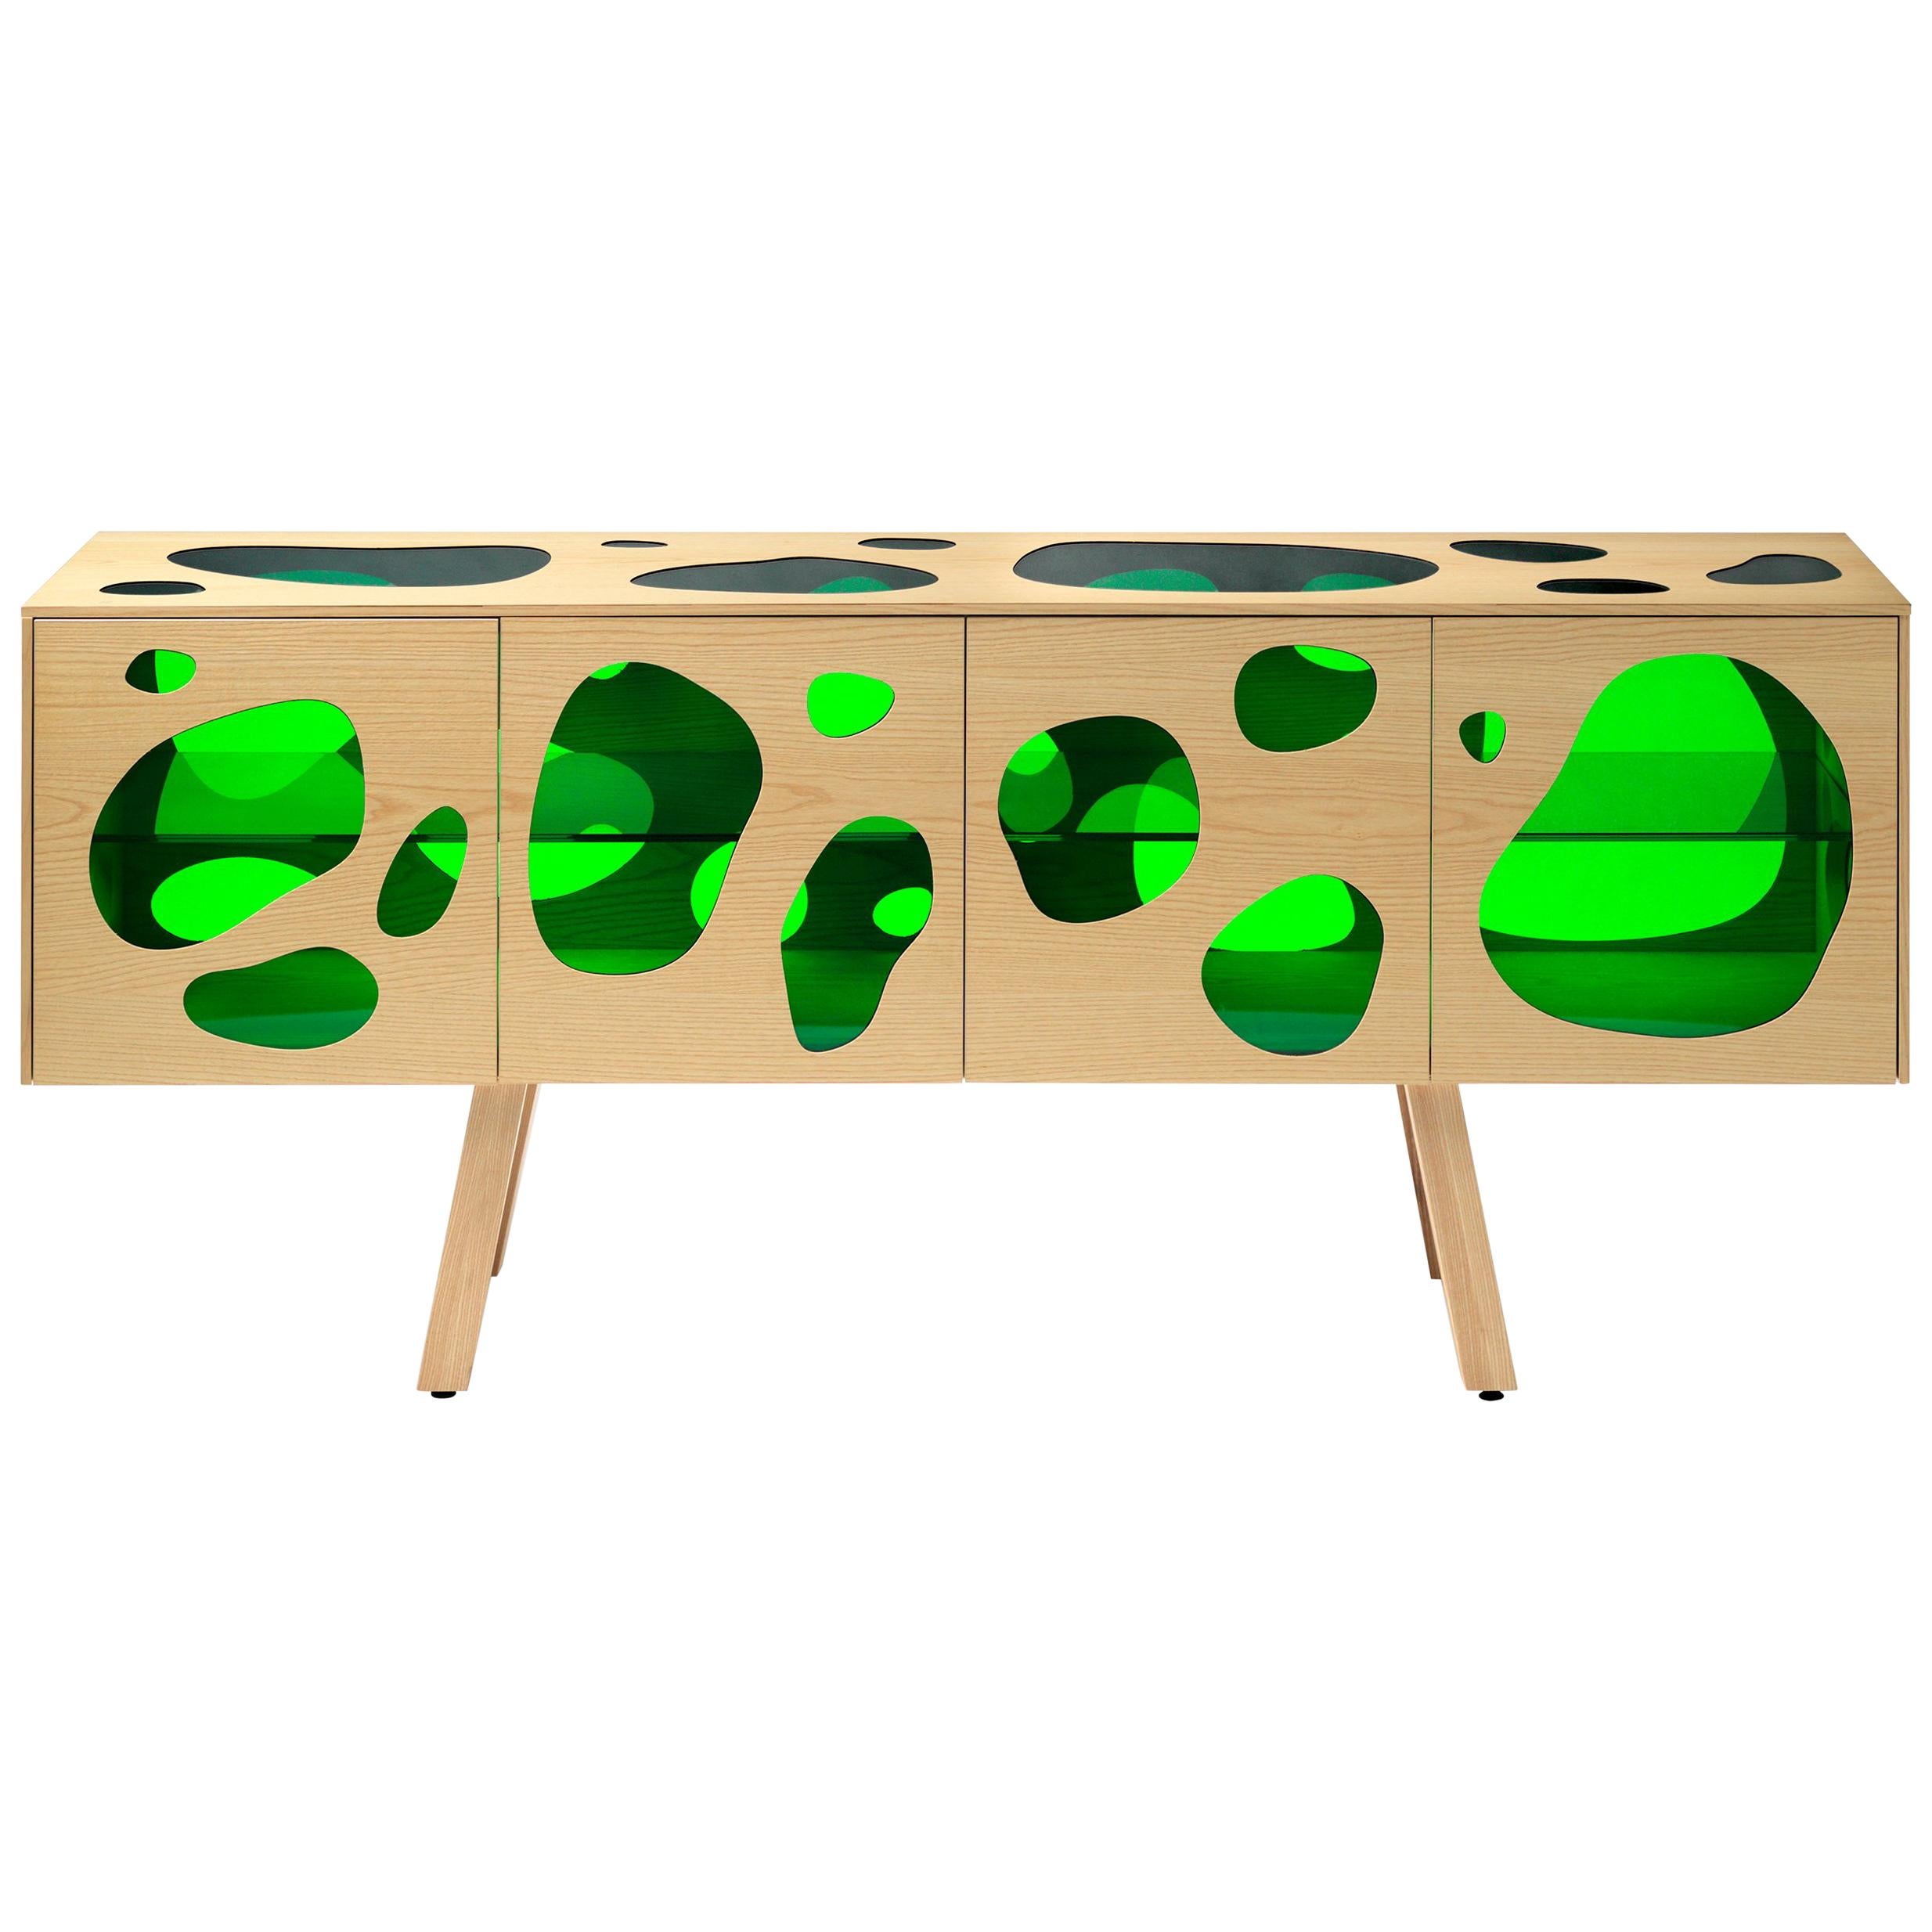 Prototype sideboard designed by Fernando and Humberto Campana in 2016.
This is the first piece ever made and is hand signed.
Manufactured in Spain.

The Campana brothers chose the colored glass to give the impression of a fish tank. The cuboid